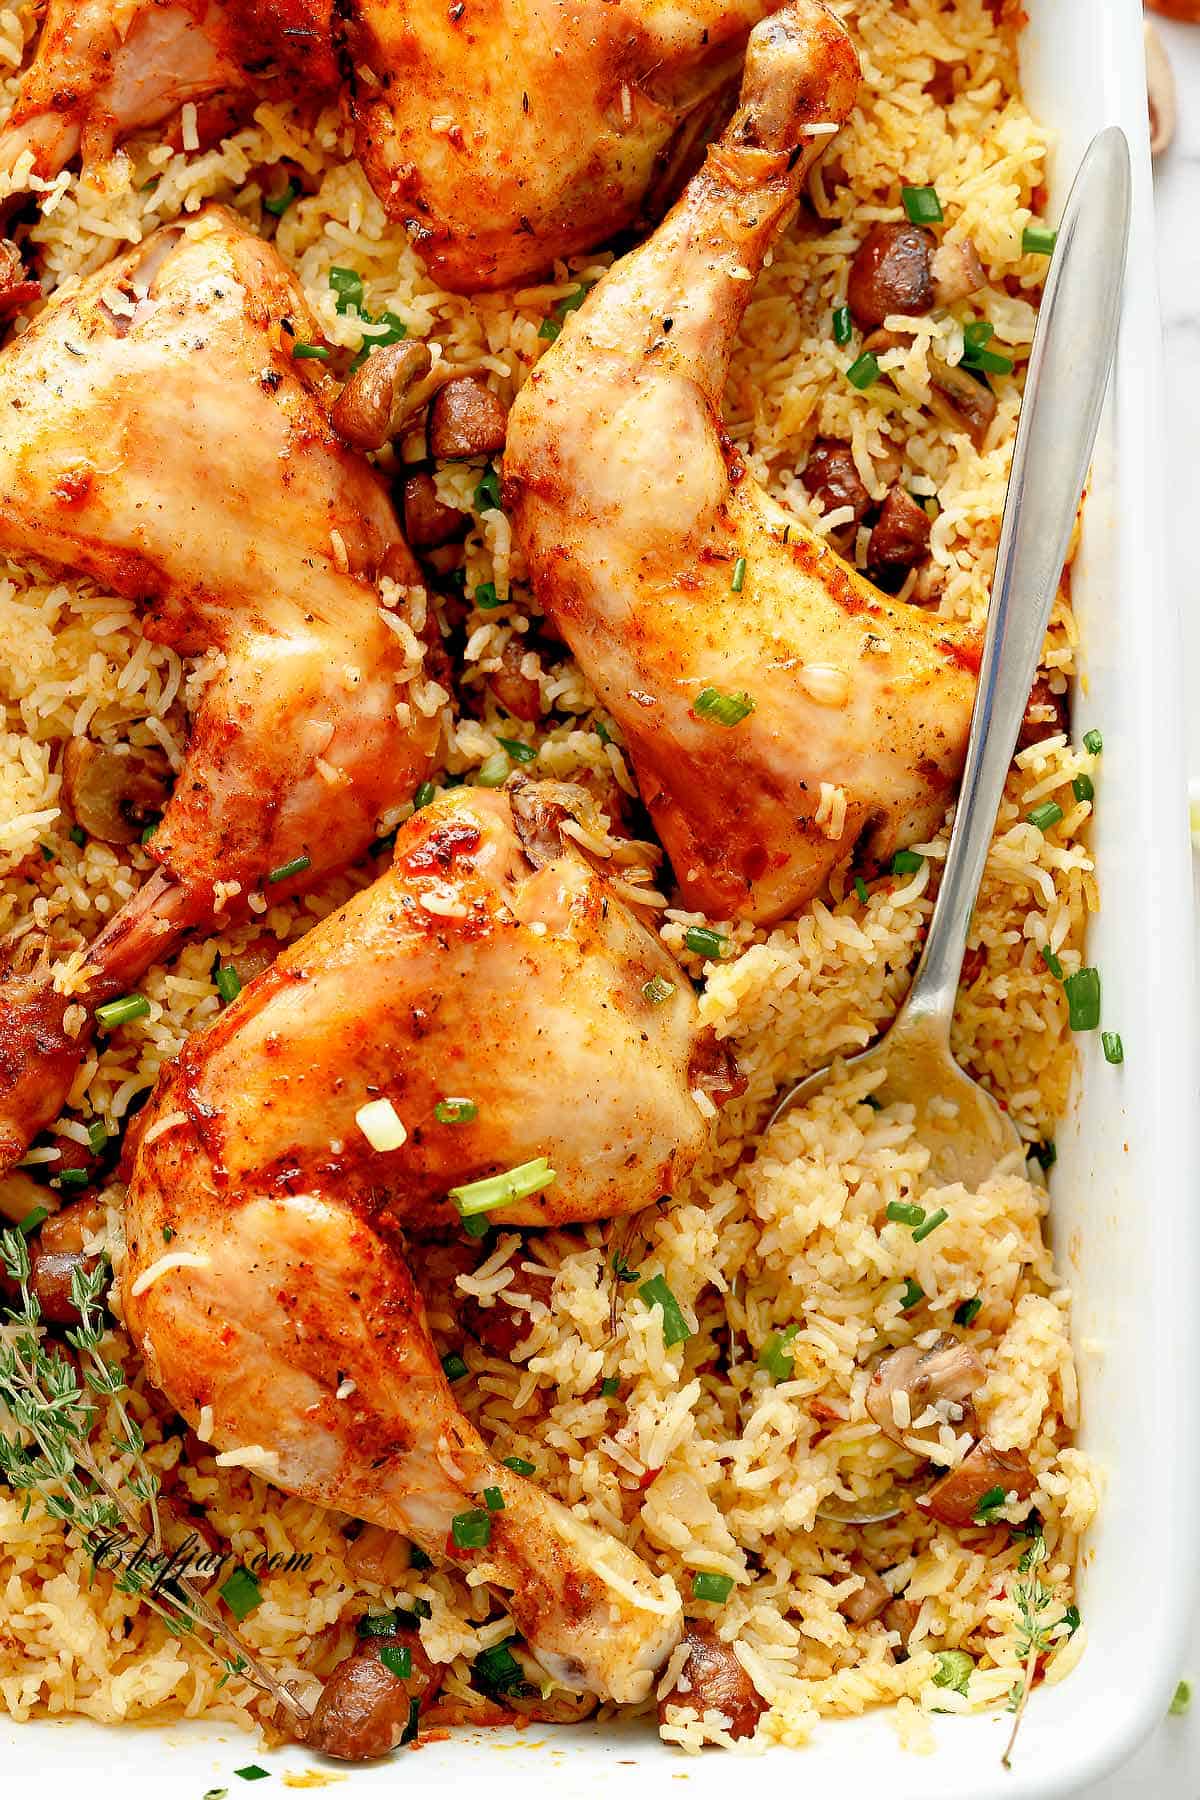 Baked Chicken Legs and Rice